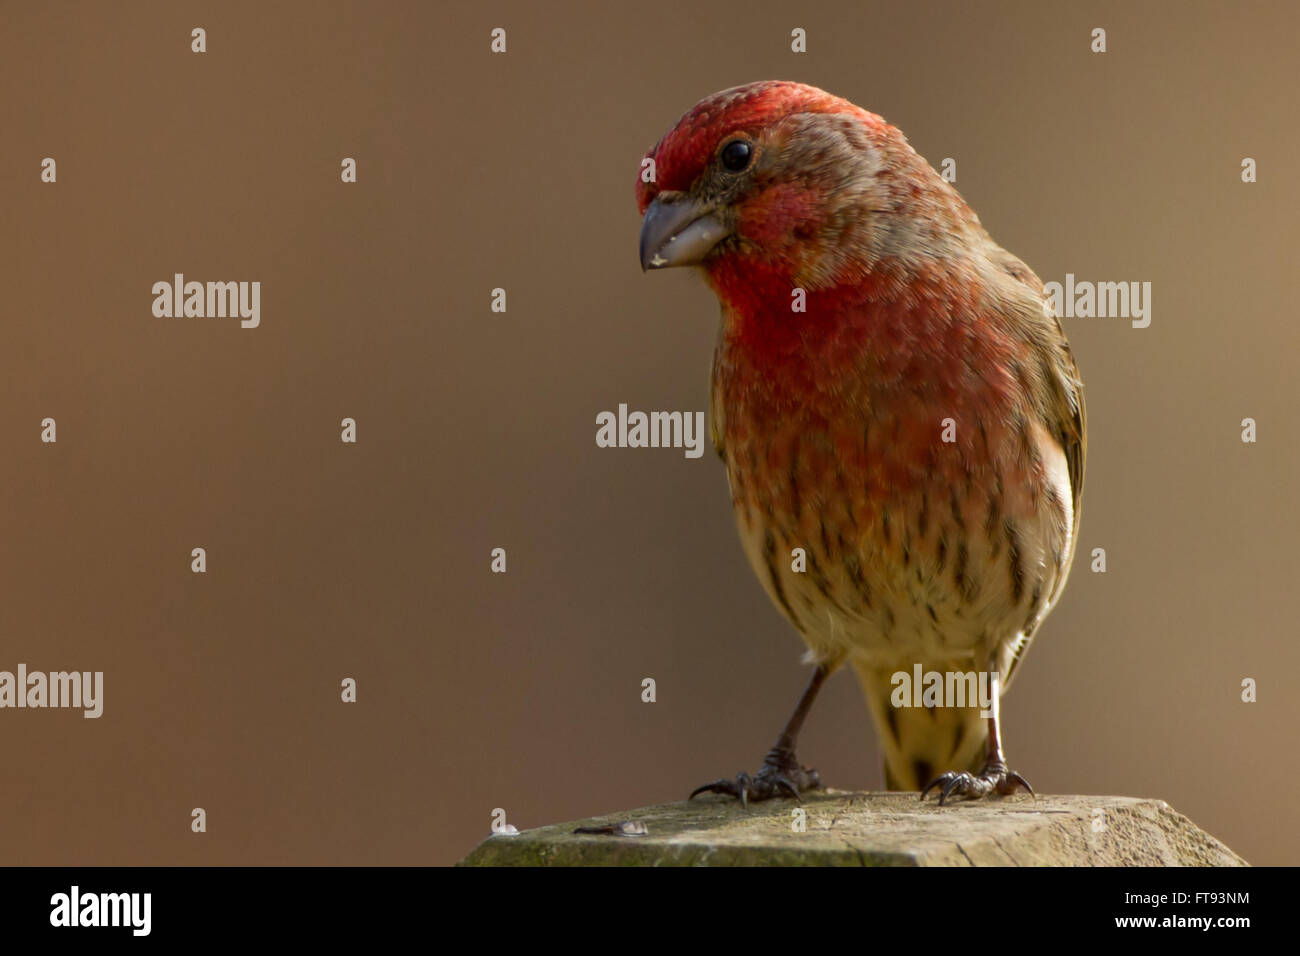 House Finch tilted head perched on a fence Stock Photo